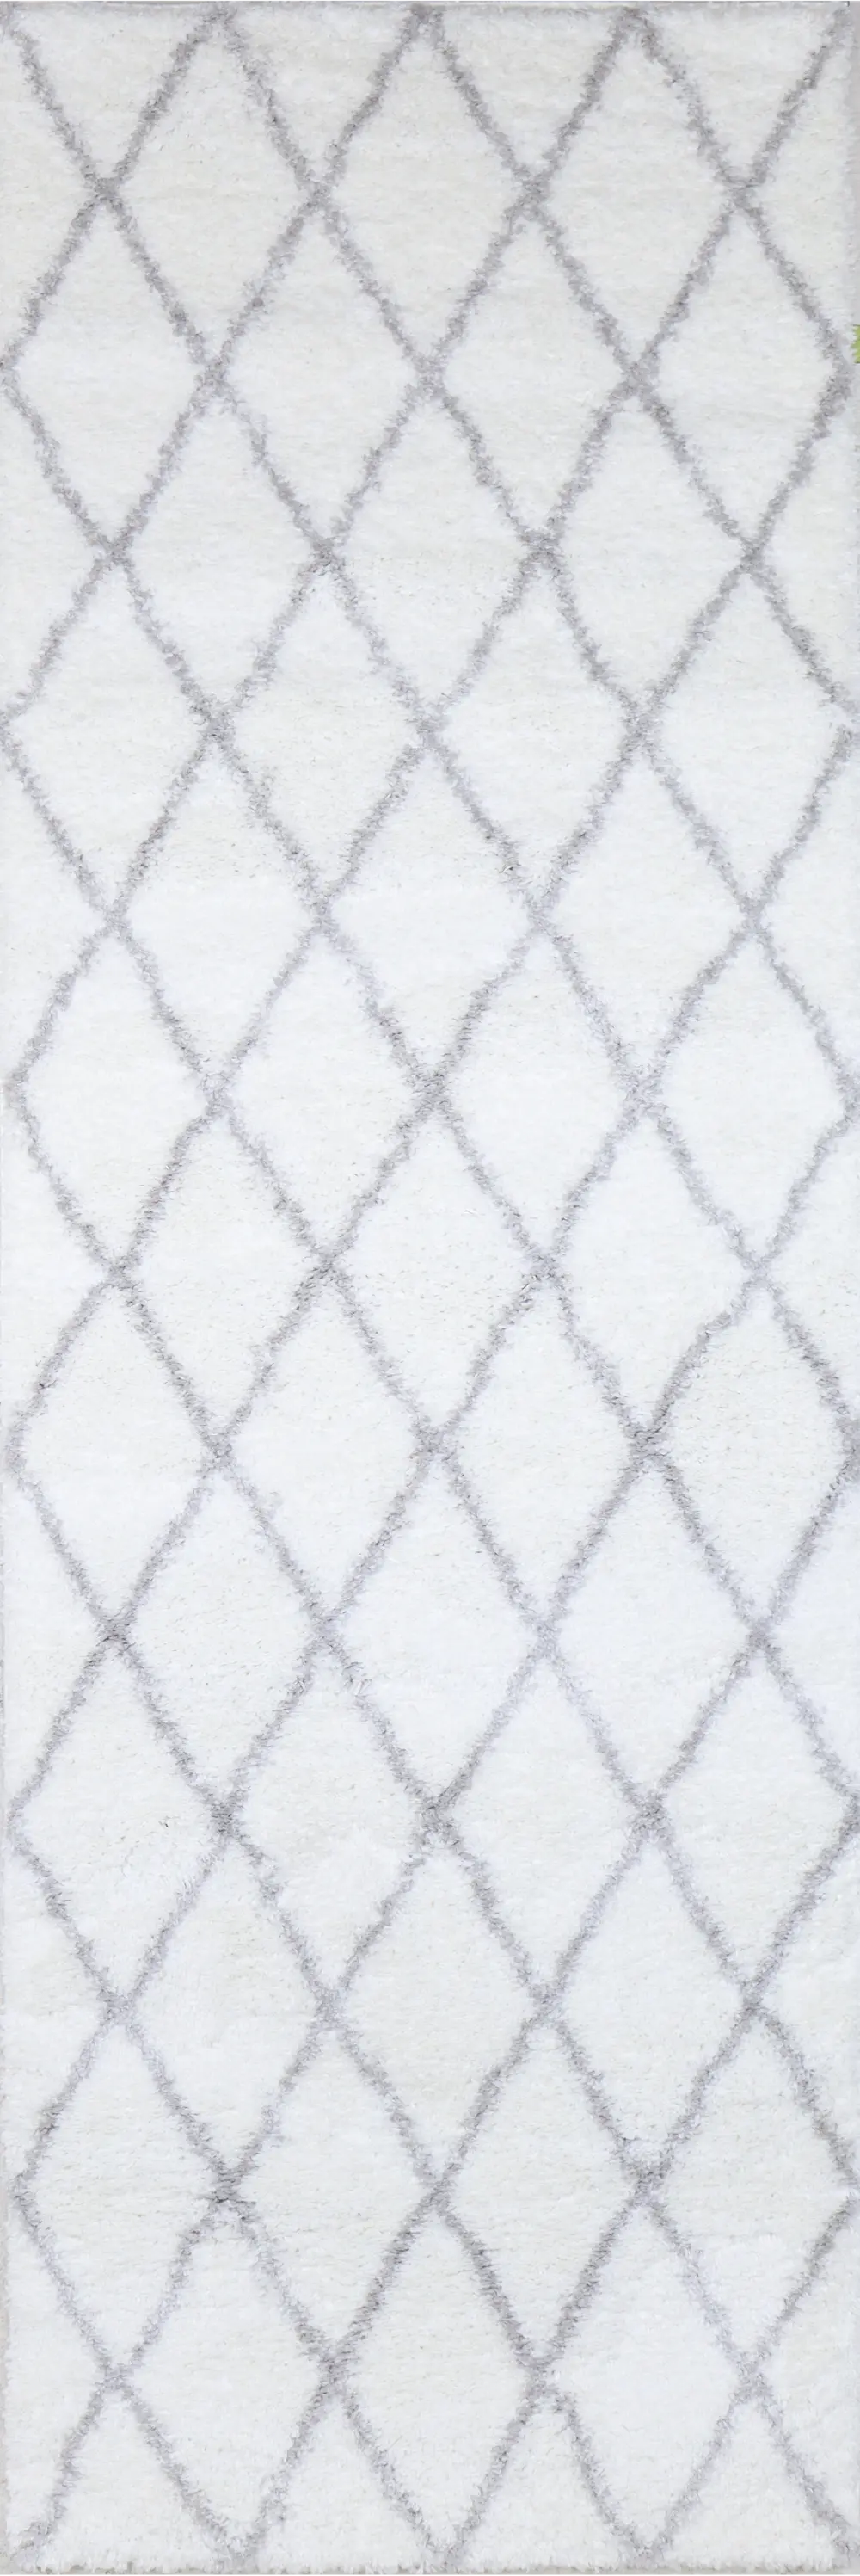 A164-WHGY-2.6X8-AND104 Faris White and Gray 8 Foot Runner Rug-1